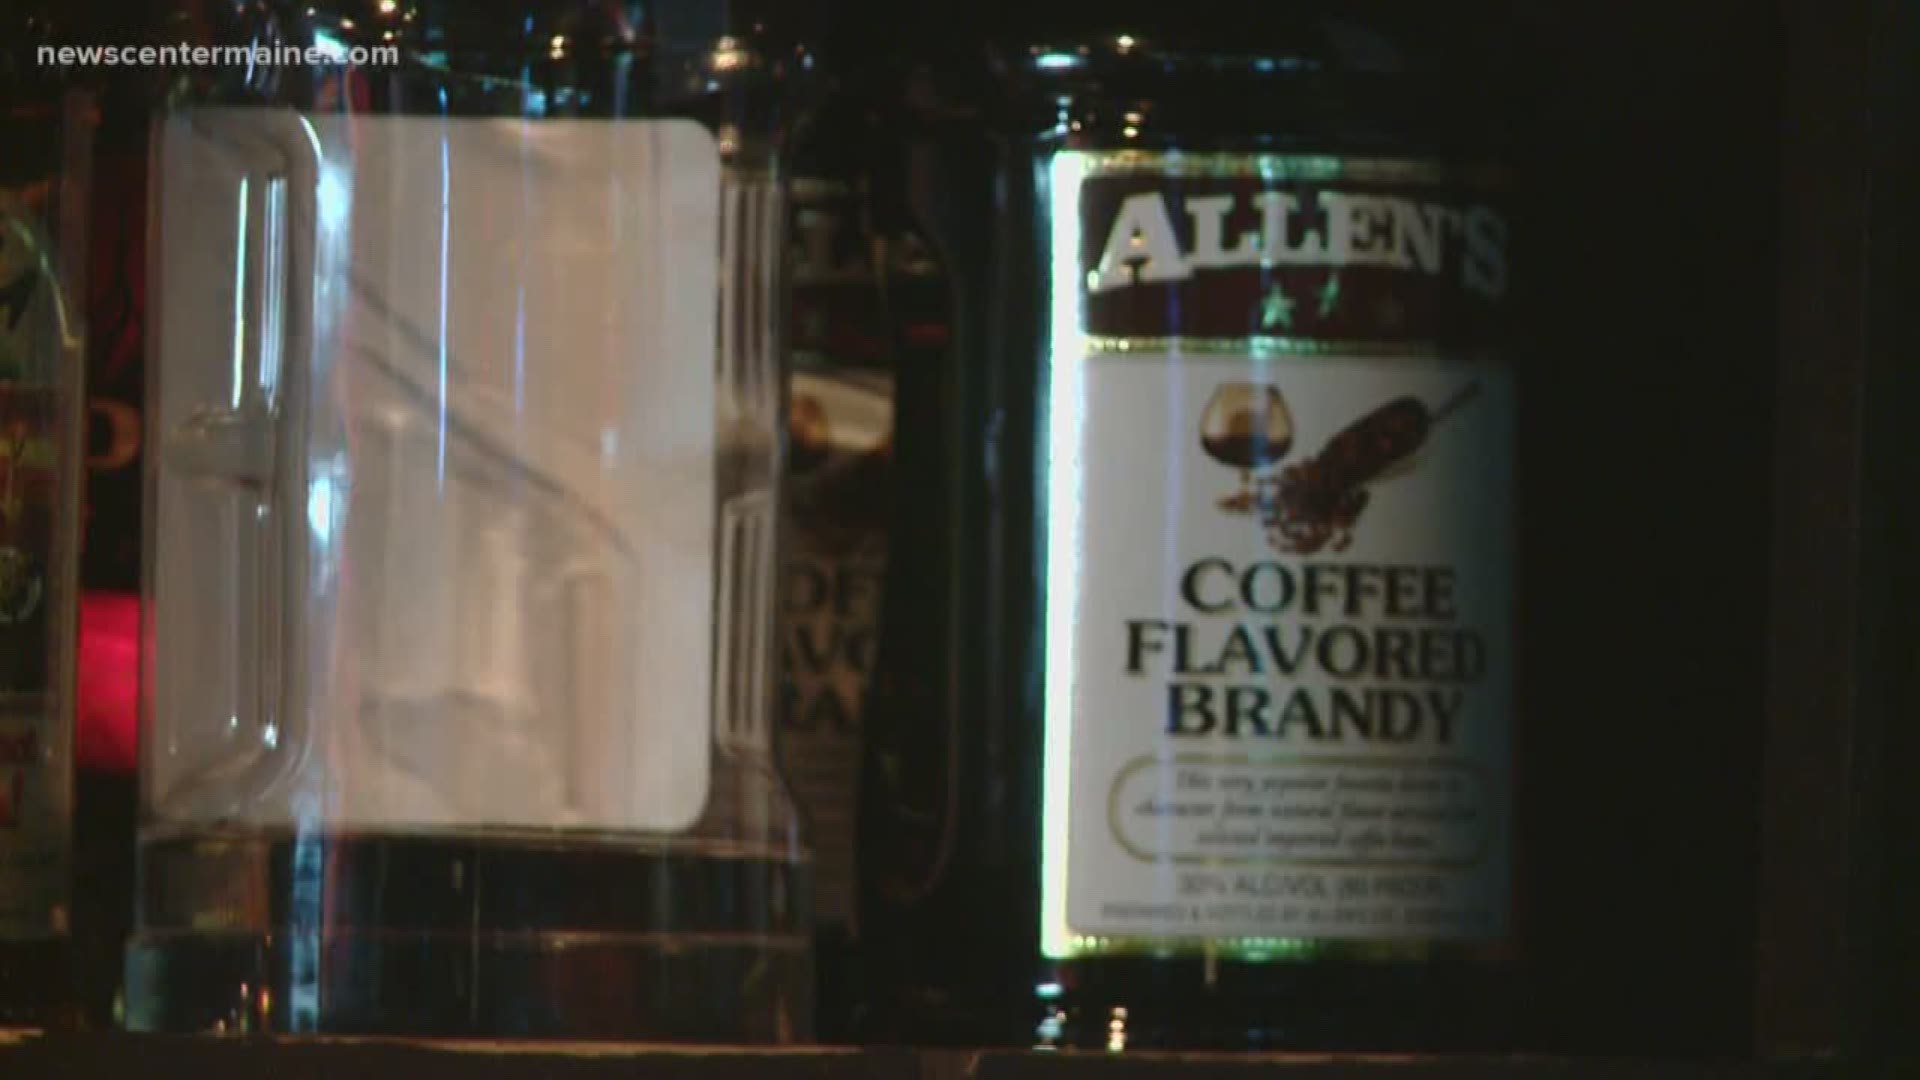 No longer is it the number one selling booze in Maine. Allen's Coffee Brandy removed from the number one spot.